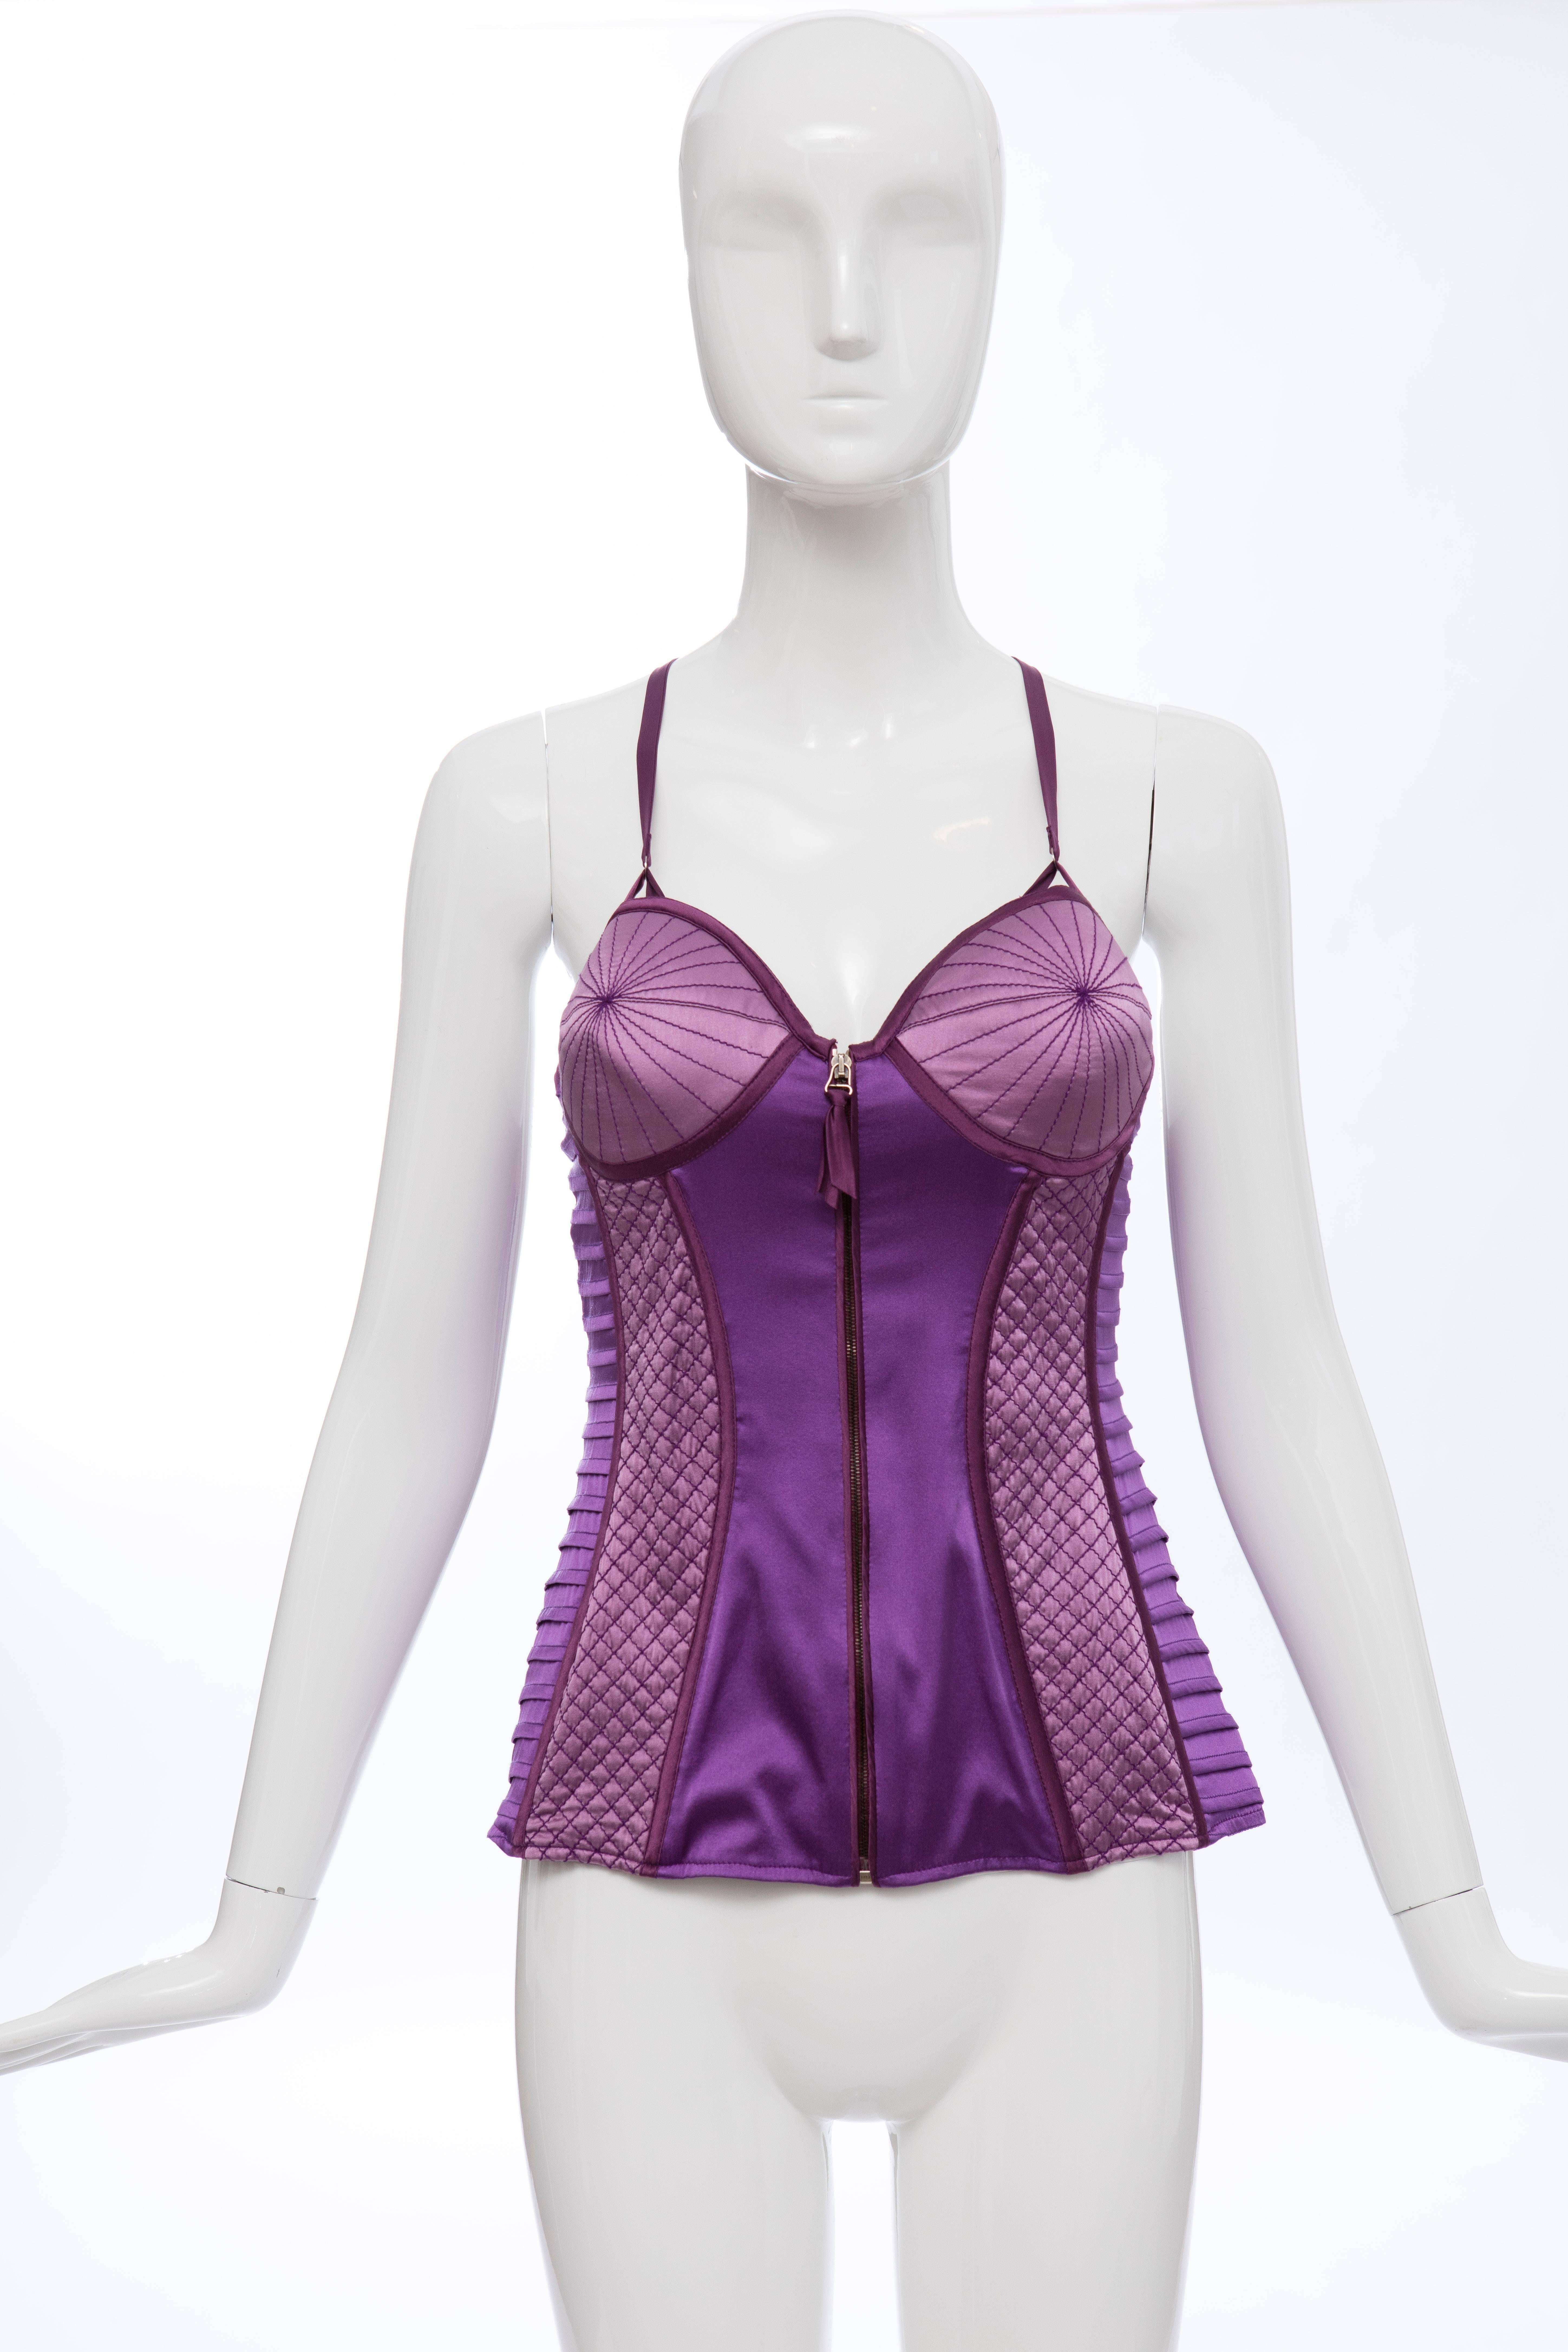 Proenza Schouler, Autumn-Winter 2005 silk bustier with tucked side panels, diagonal stitch front panels, centered zip front, adjustable straps and fully lined in silk.


US. 6

Bust 32, Waist 34, Length 17